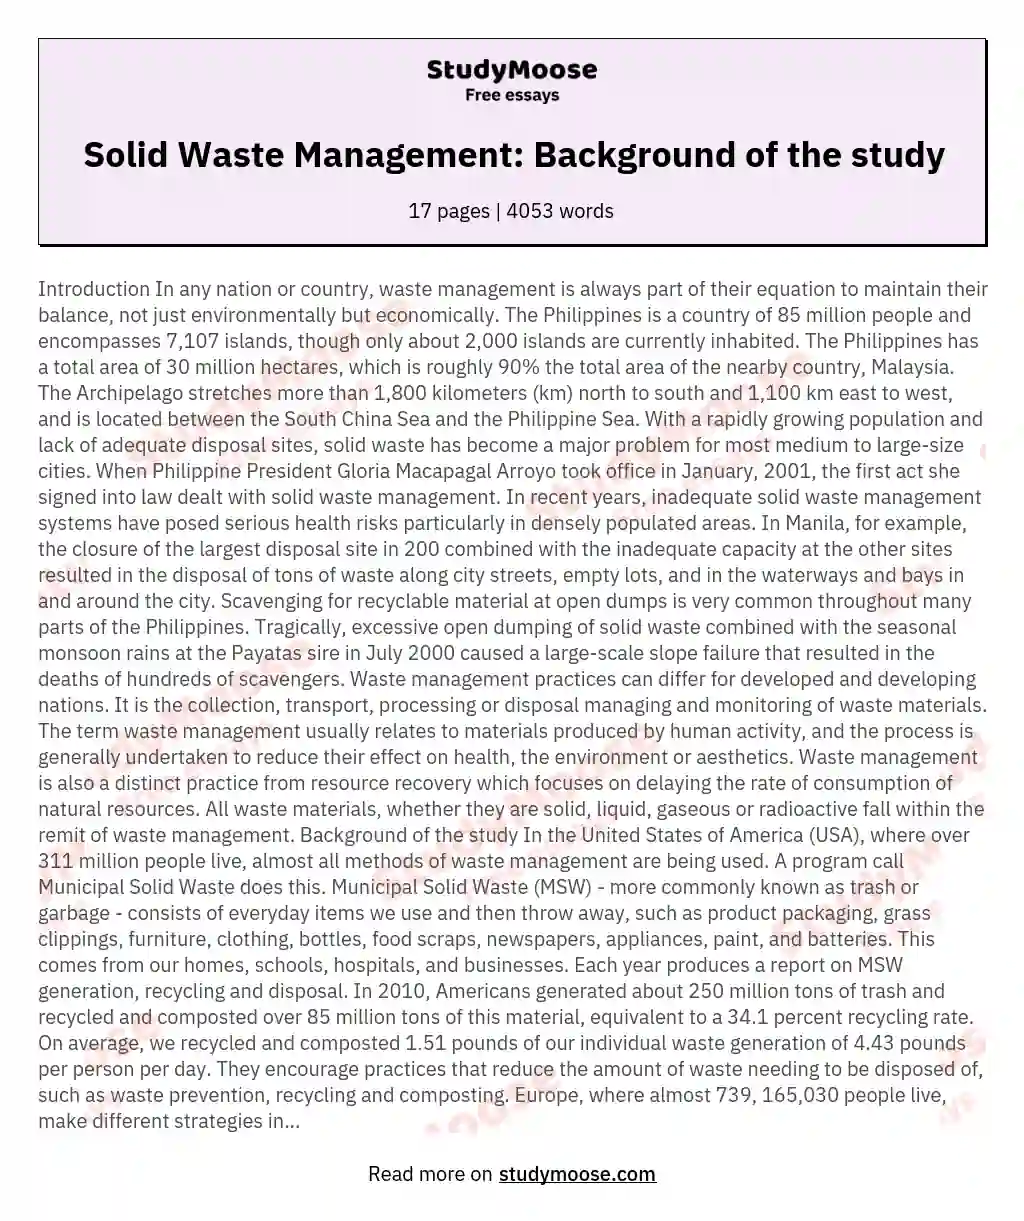 Solid Waste Management: Background of the study essay